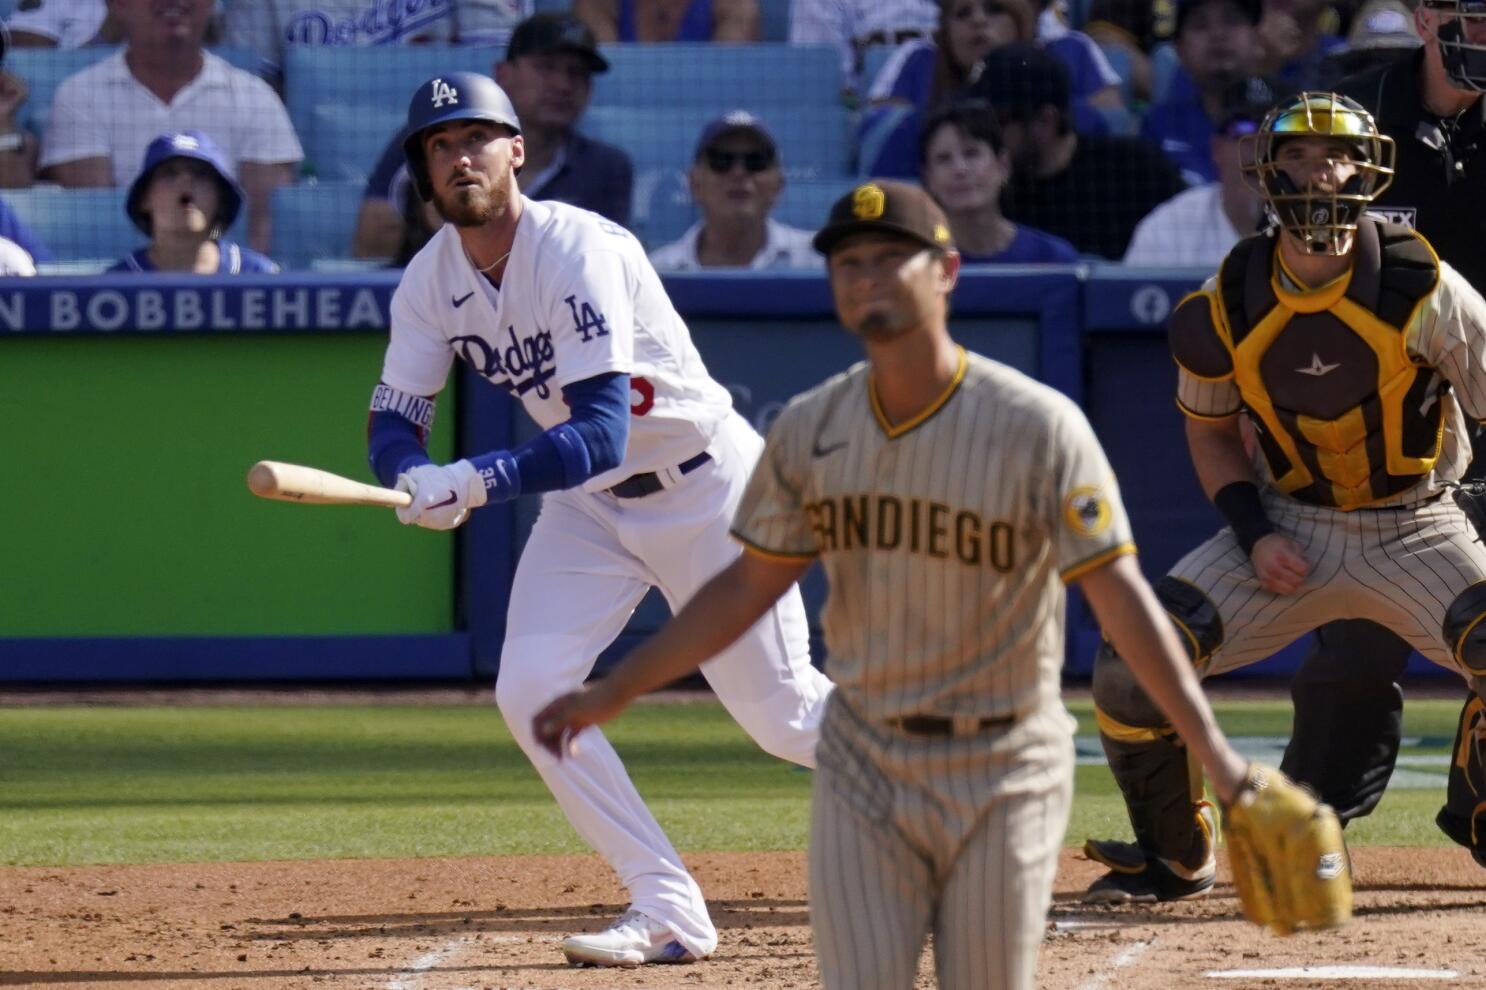 Dodgers News: Cody Bellinger Humbled By Struggles, But Remaining Confident